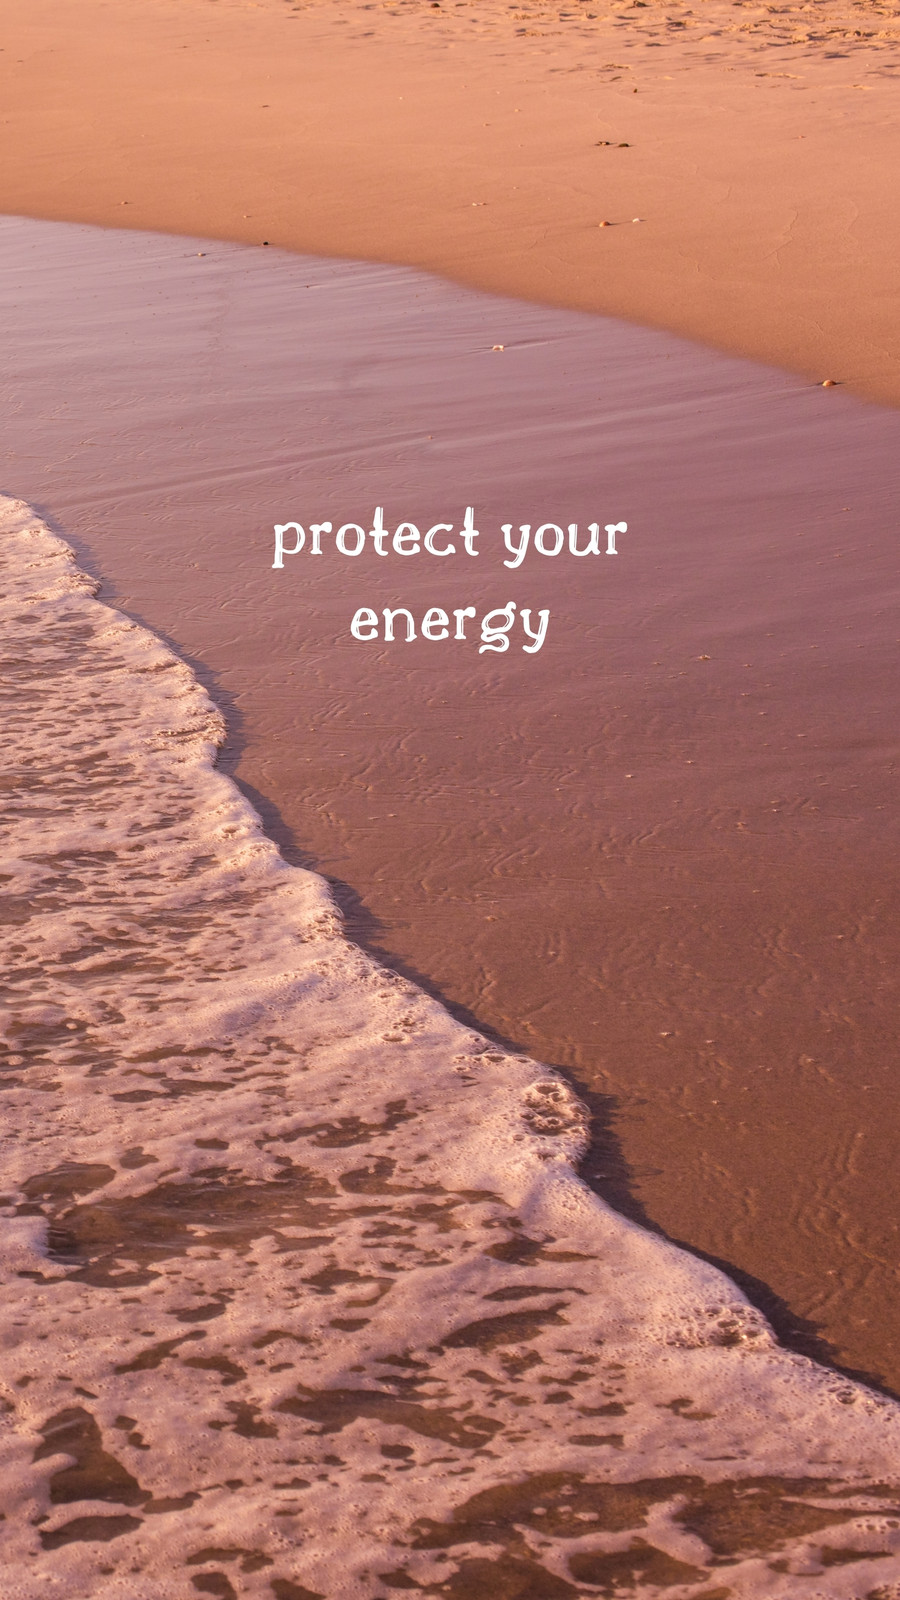 protect your energy by Brenna Murray on Dribbble